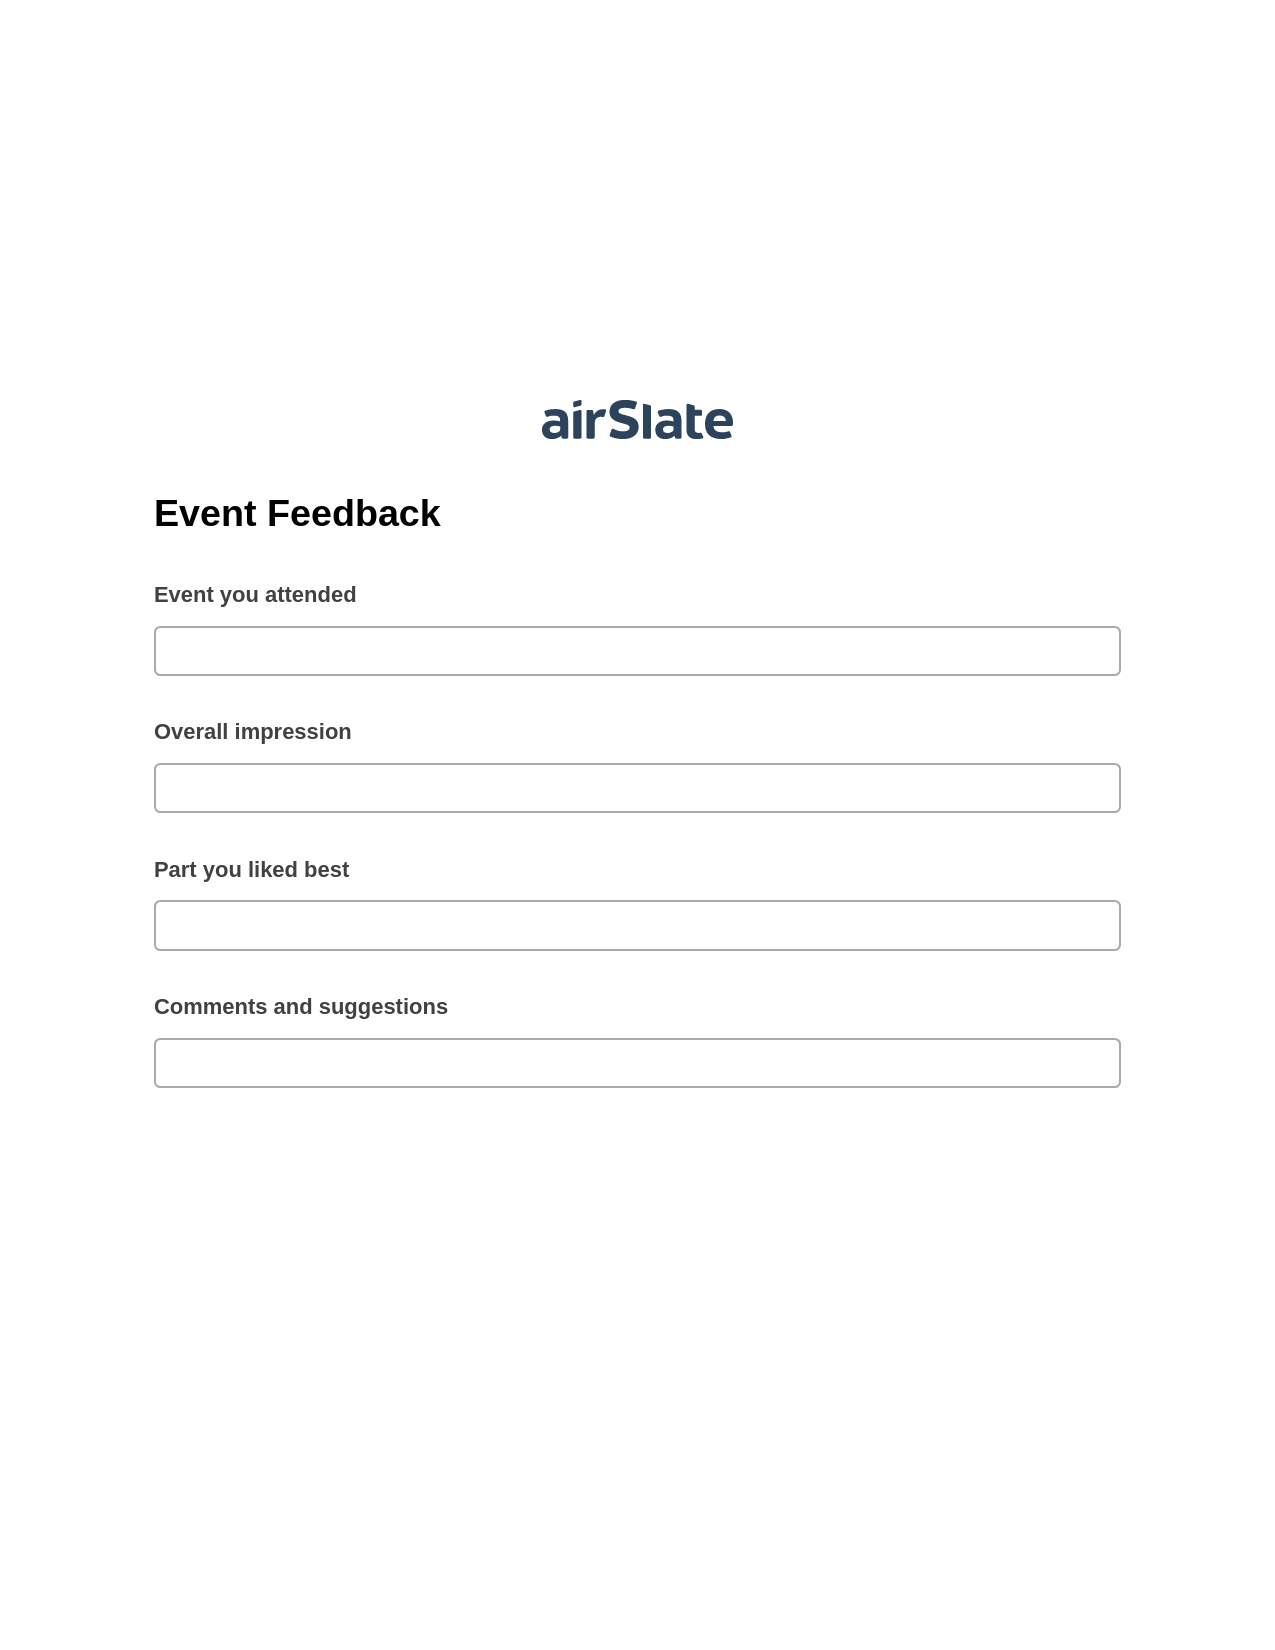 Event Feedback Pre-fill from another Slate Bot, Create Slate Reminder Bot, Slack Two-Way Binding Bot